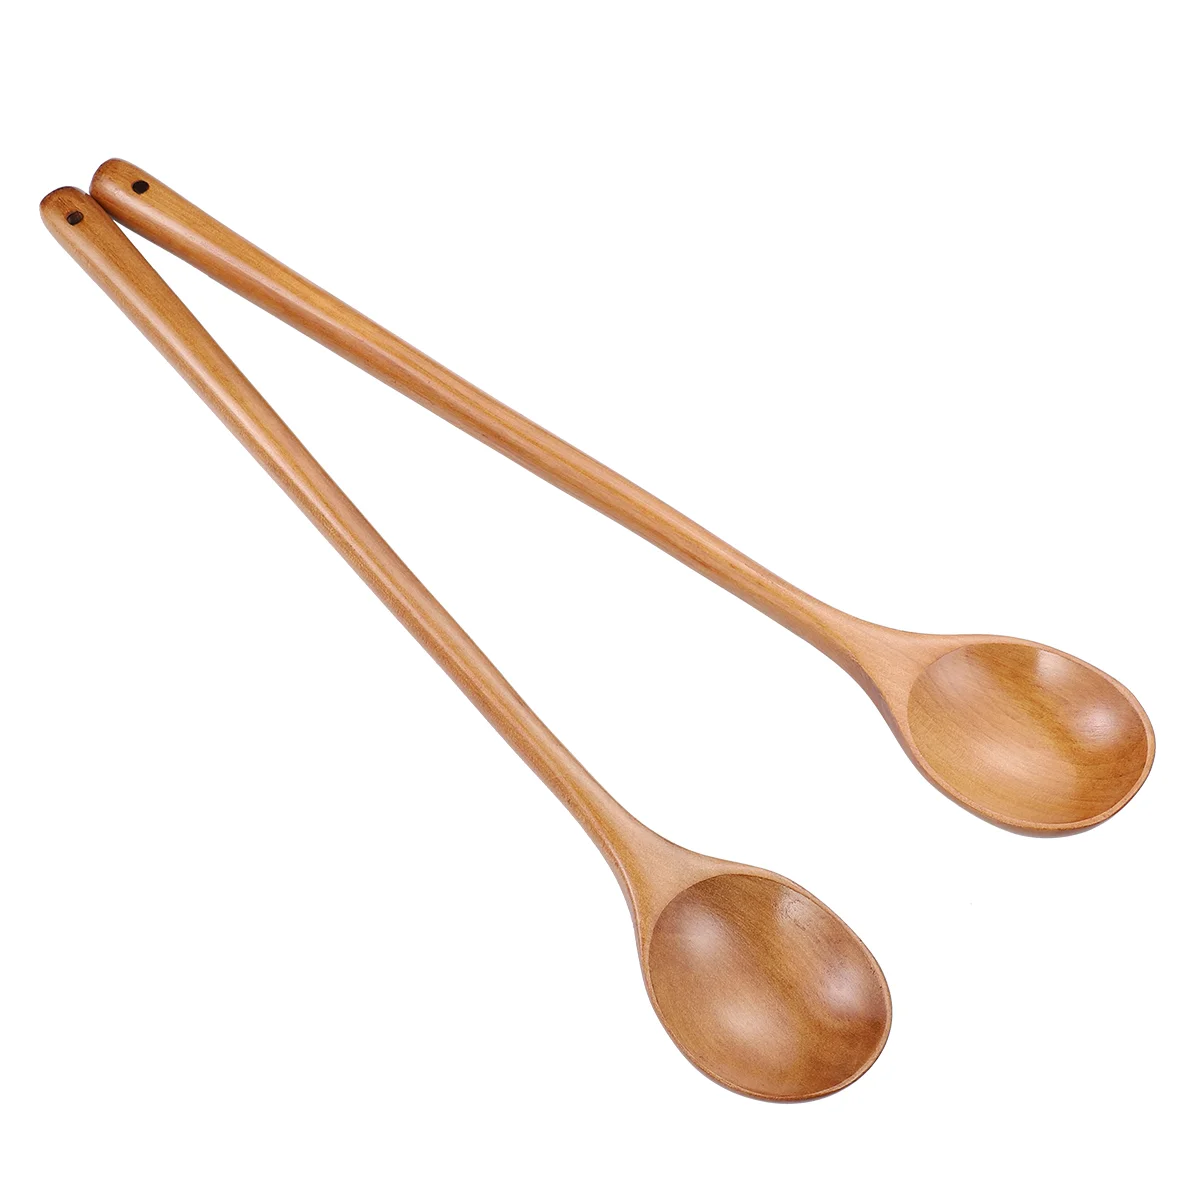 

Spoon Spoons Soup Ladle Wooden Cooking Wood Handle Kitchen Serving Mixing Tool Hot Retro Ramen Tasting Honey Rice Fruit Jelly